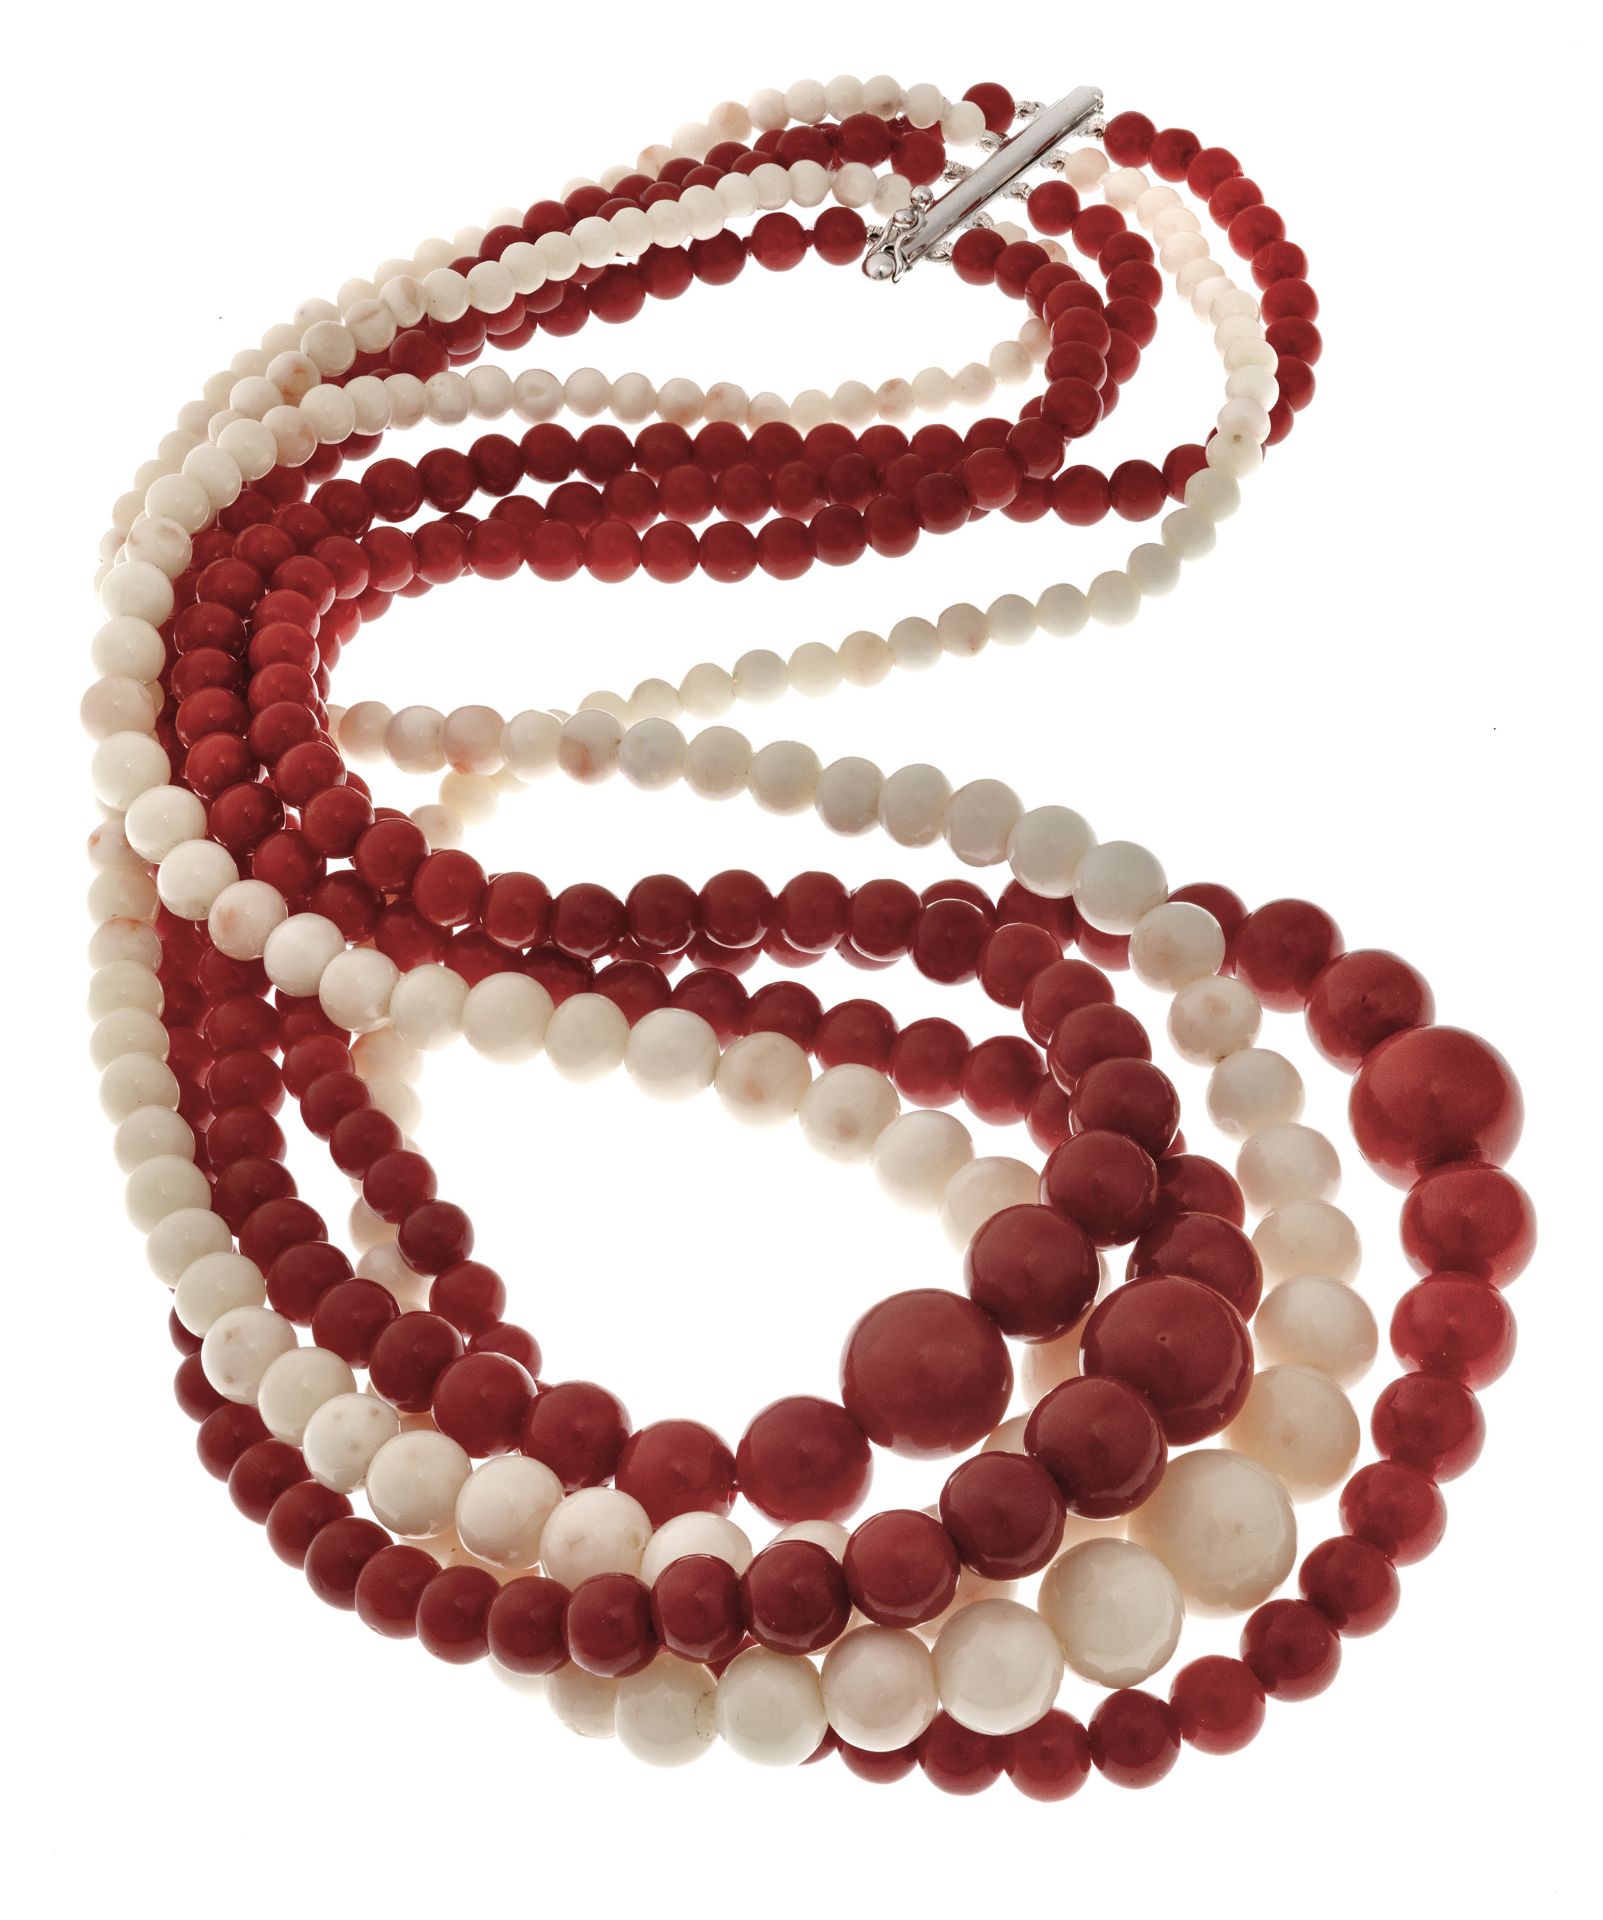 SIX-STRAND CORAL NECKLACE